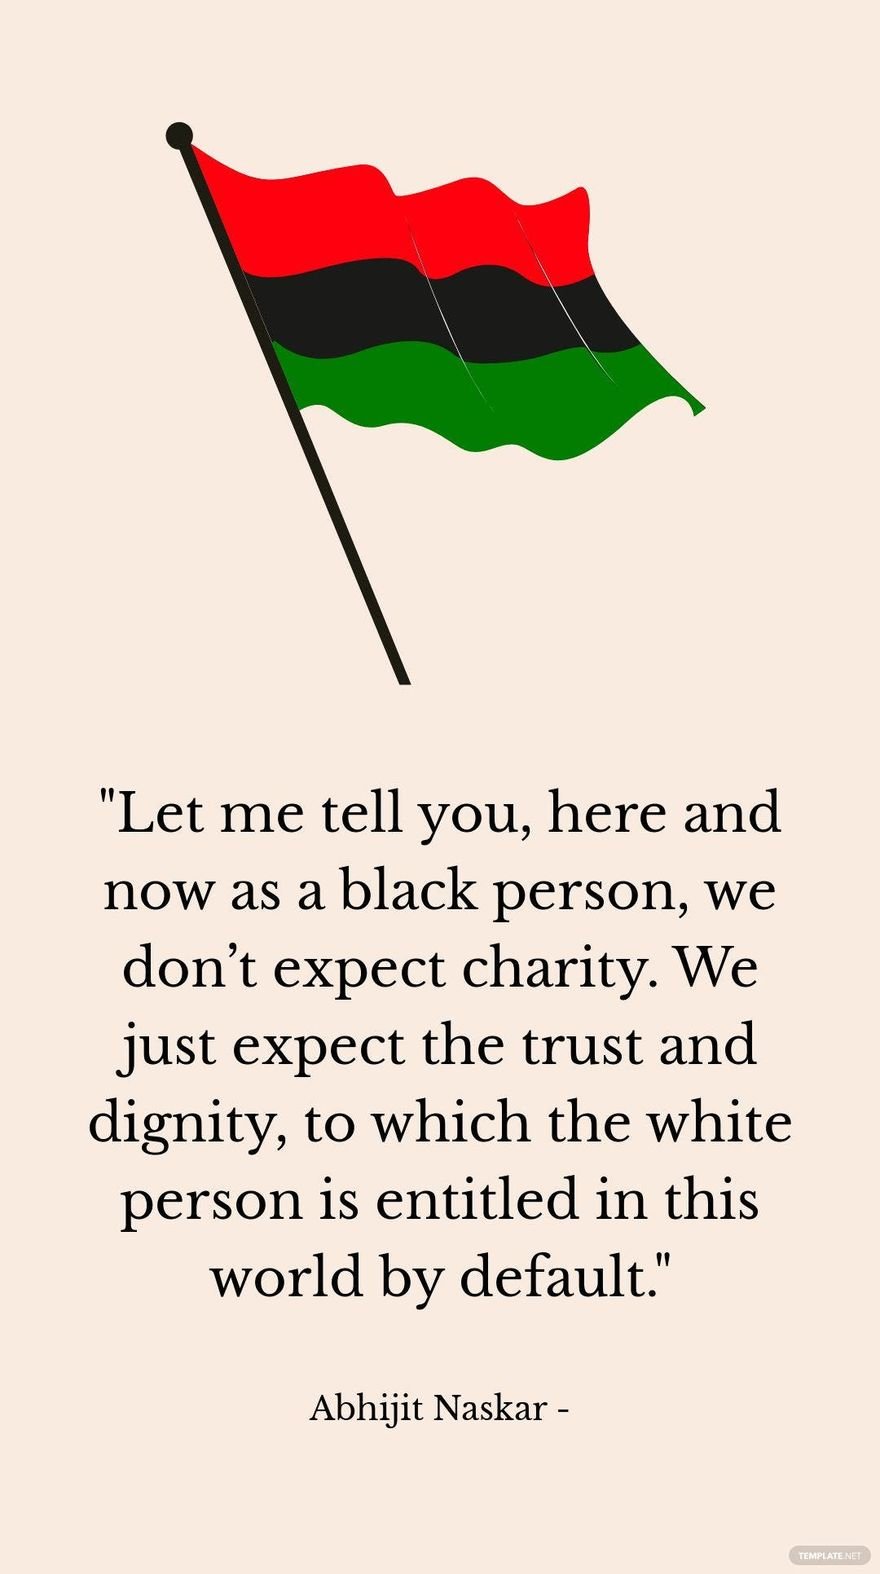 Abhijit Naskar - Let me tell you, here and now as a black person, we don’t expect charity. We just expect the trust and dignity, to which the white person is entitled in this world by default.